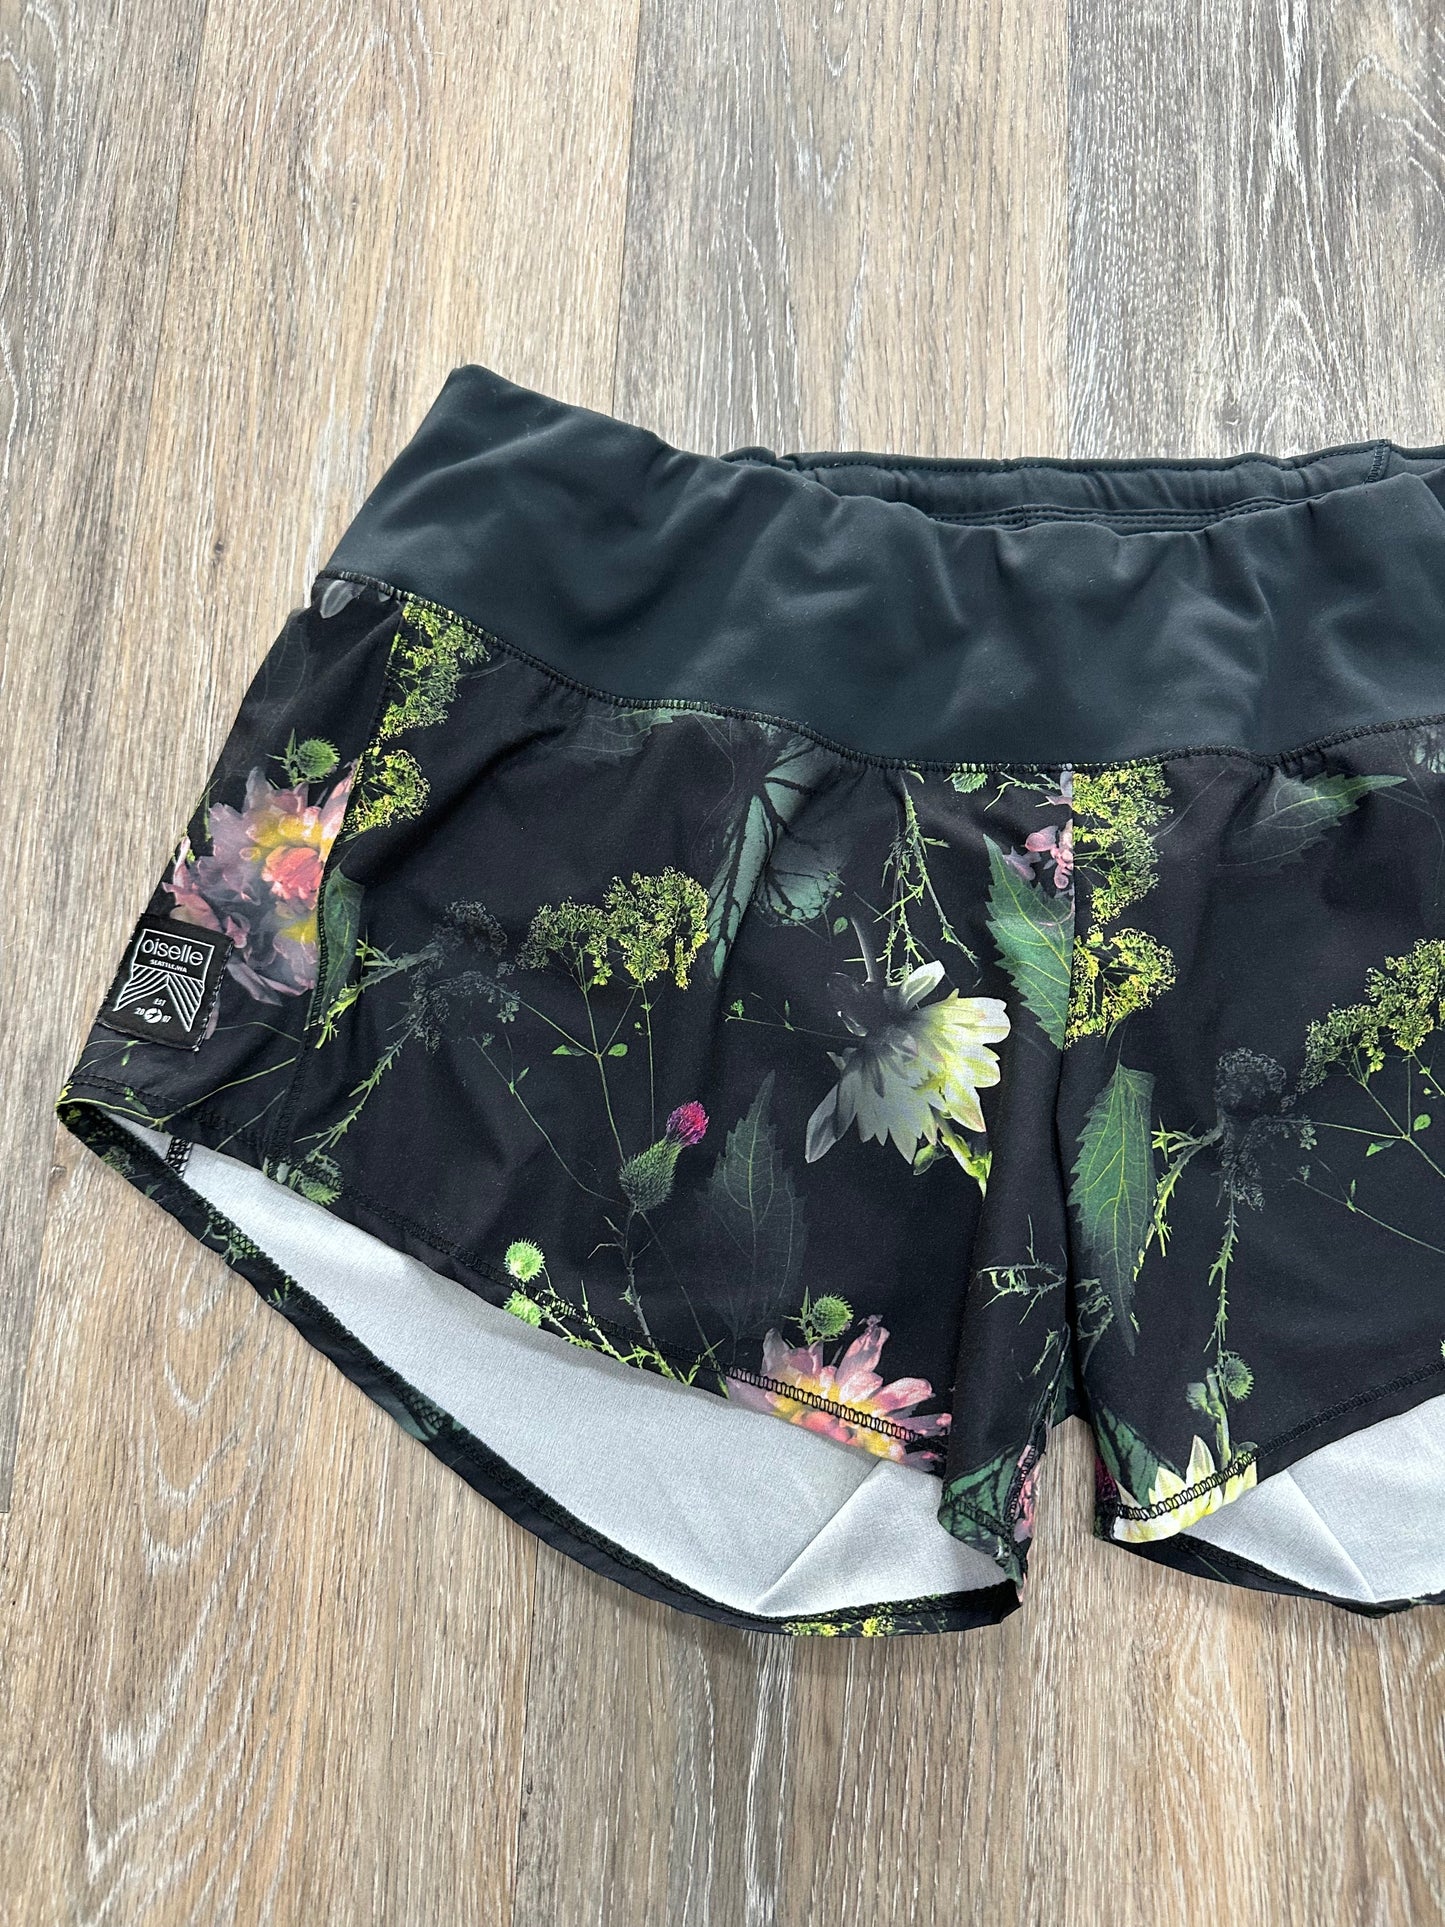 Athletic Shorts By Oiselle Size: 10